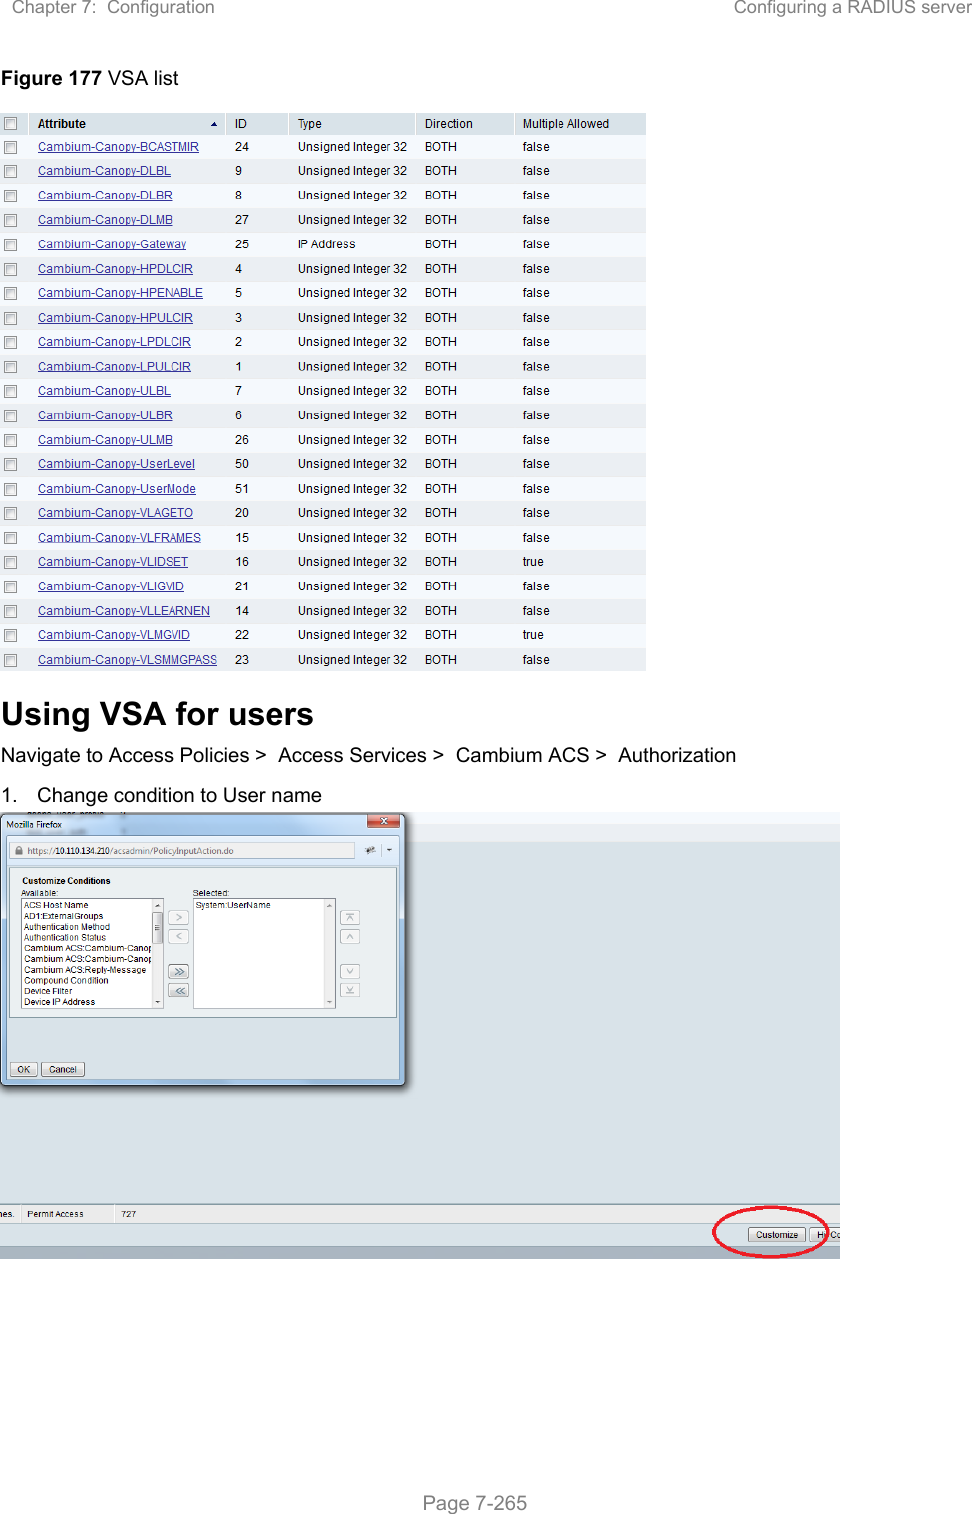 Chapter 7:  Configuration  Configuring a RADIUS server   Page 7-265 Figure 177 VSA list  Using VSA for users Navigate to Access Policies &gt;  Access Services &gt;  Cambium ACS &gt;  Authorization 1.  Change condition to User name      